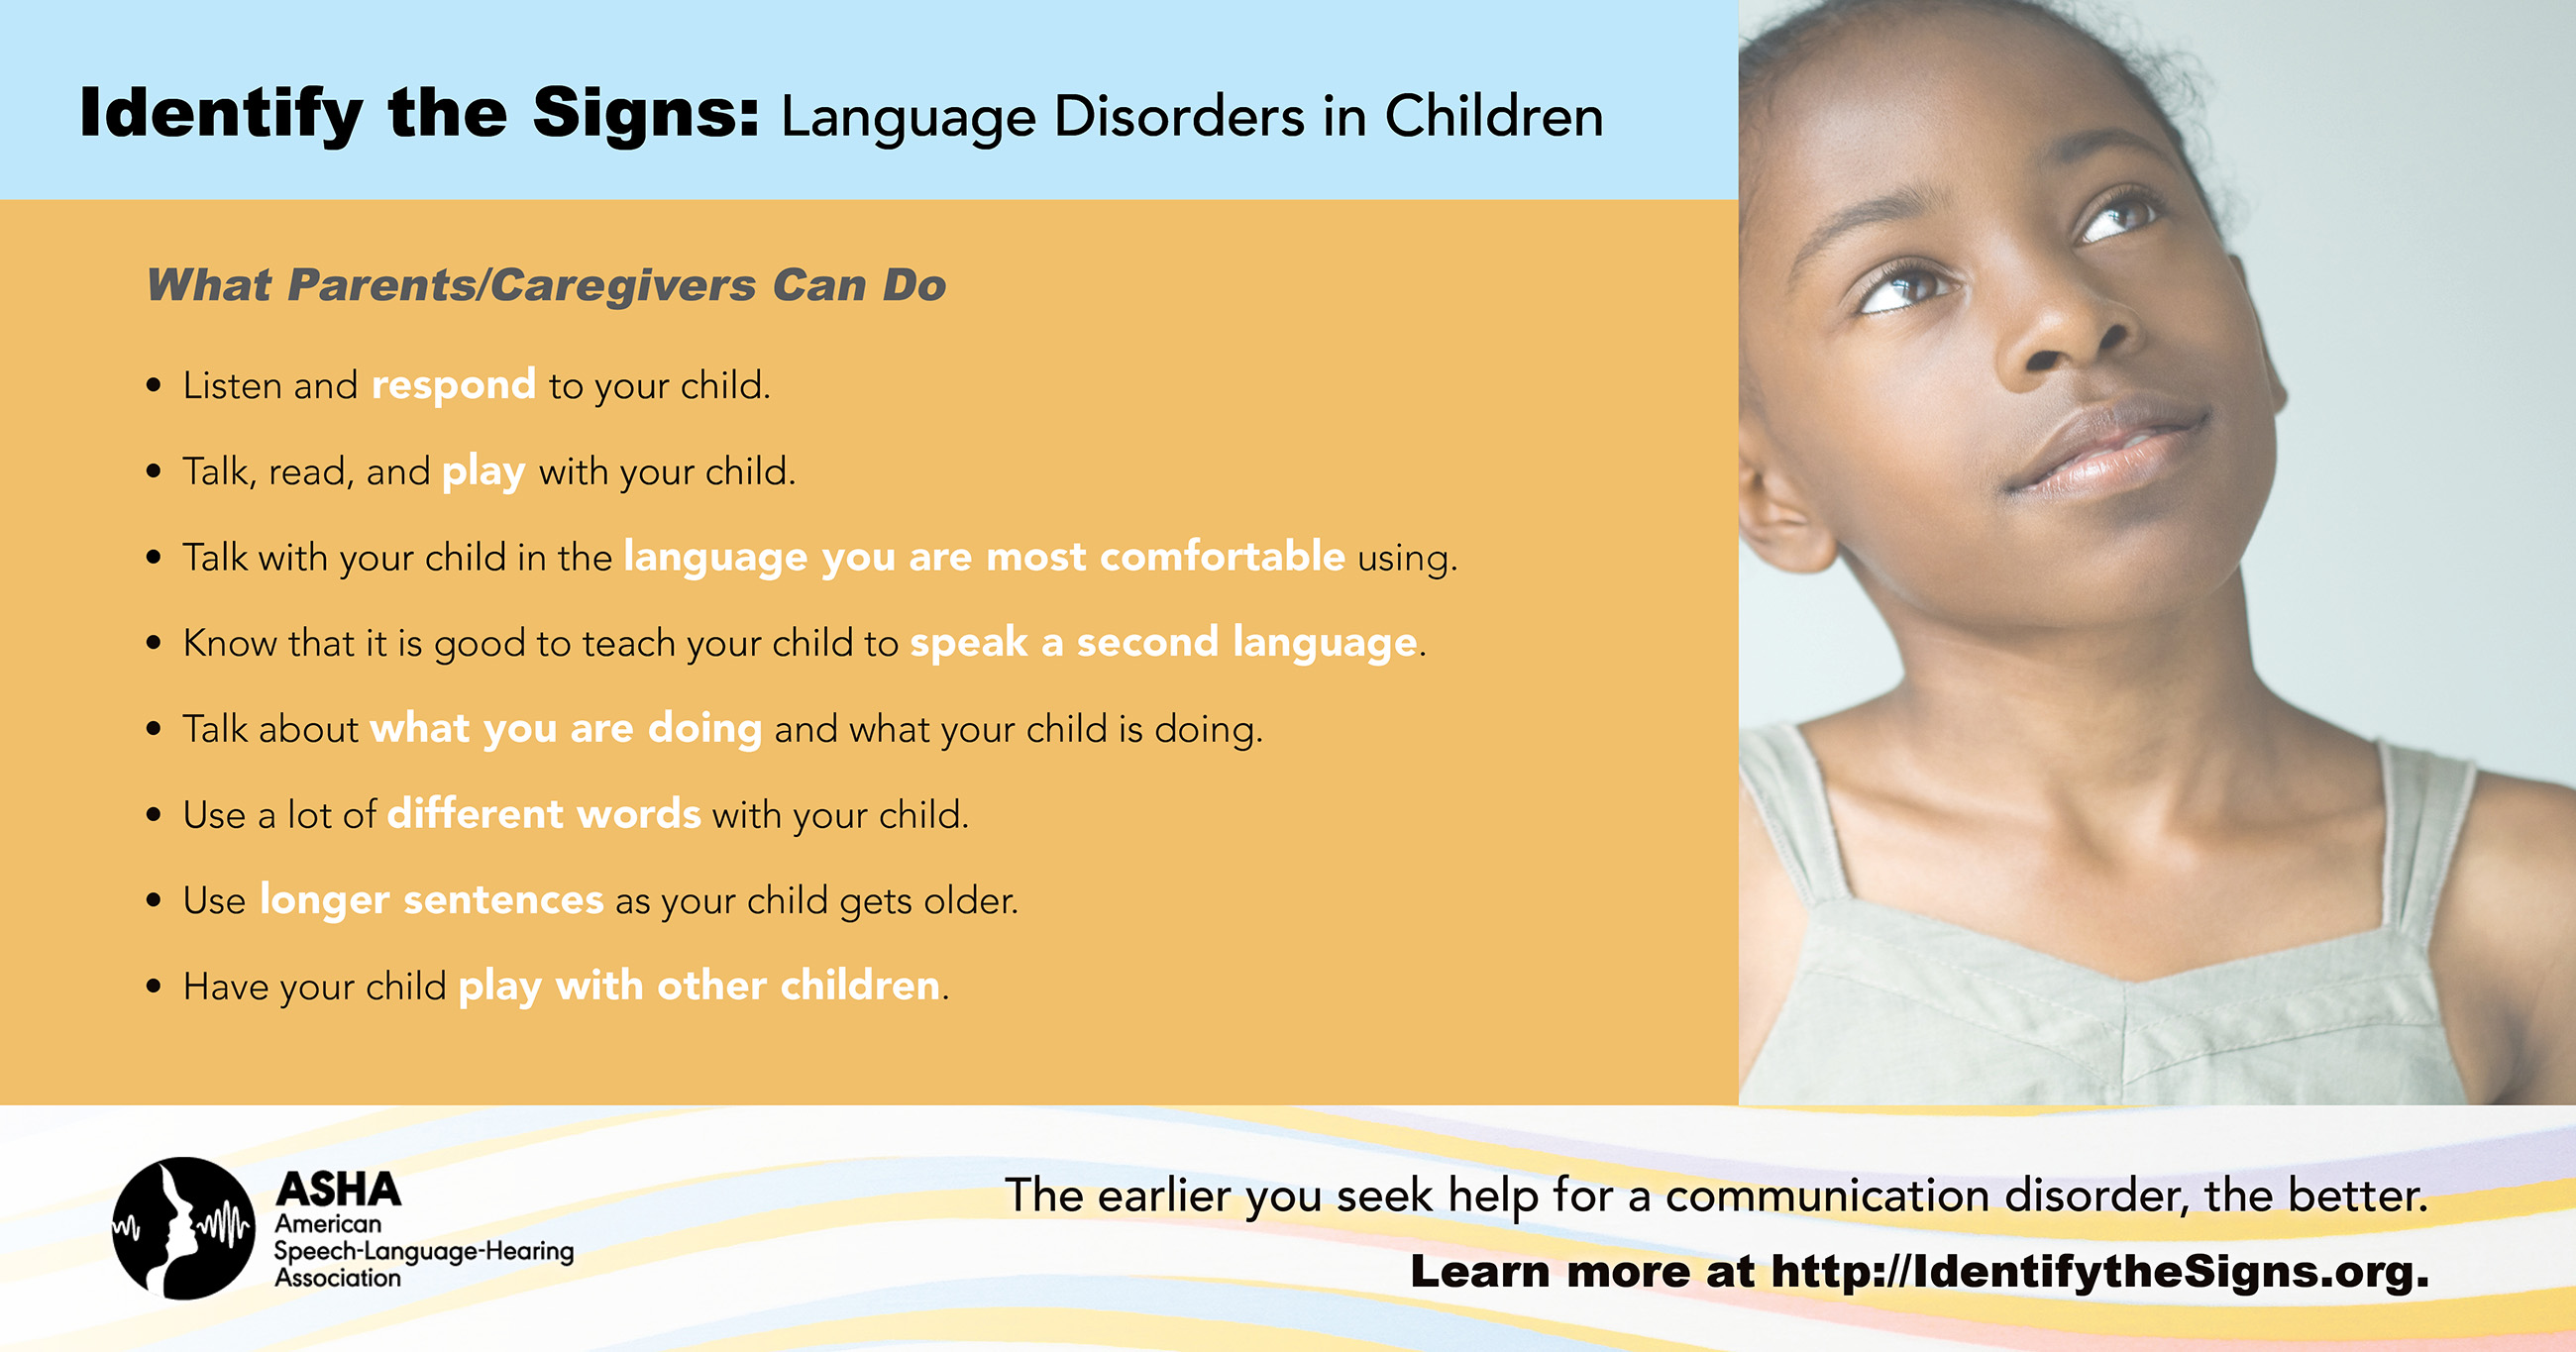 Tips for caregivers to help a child with a language delay or disorder.